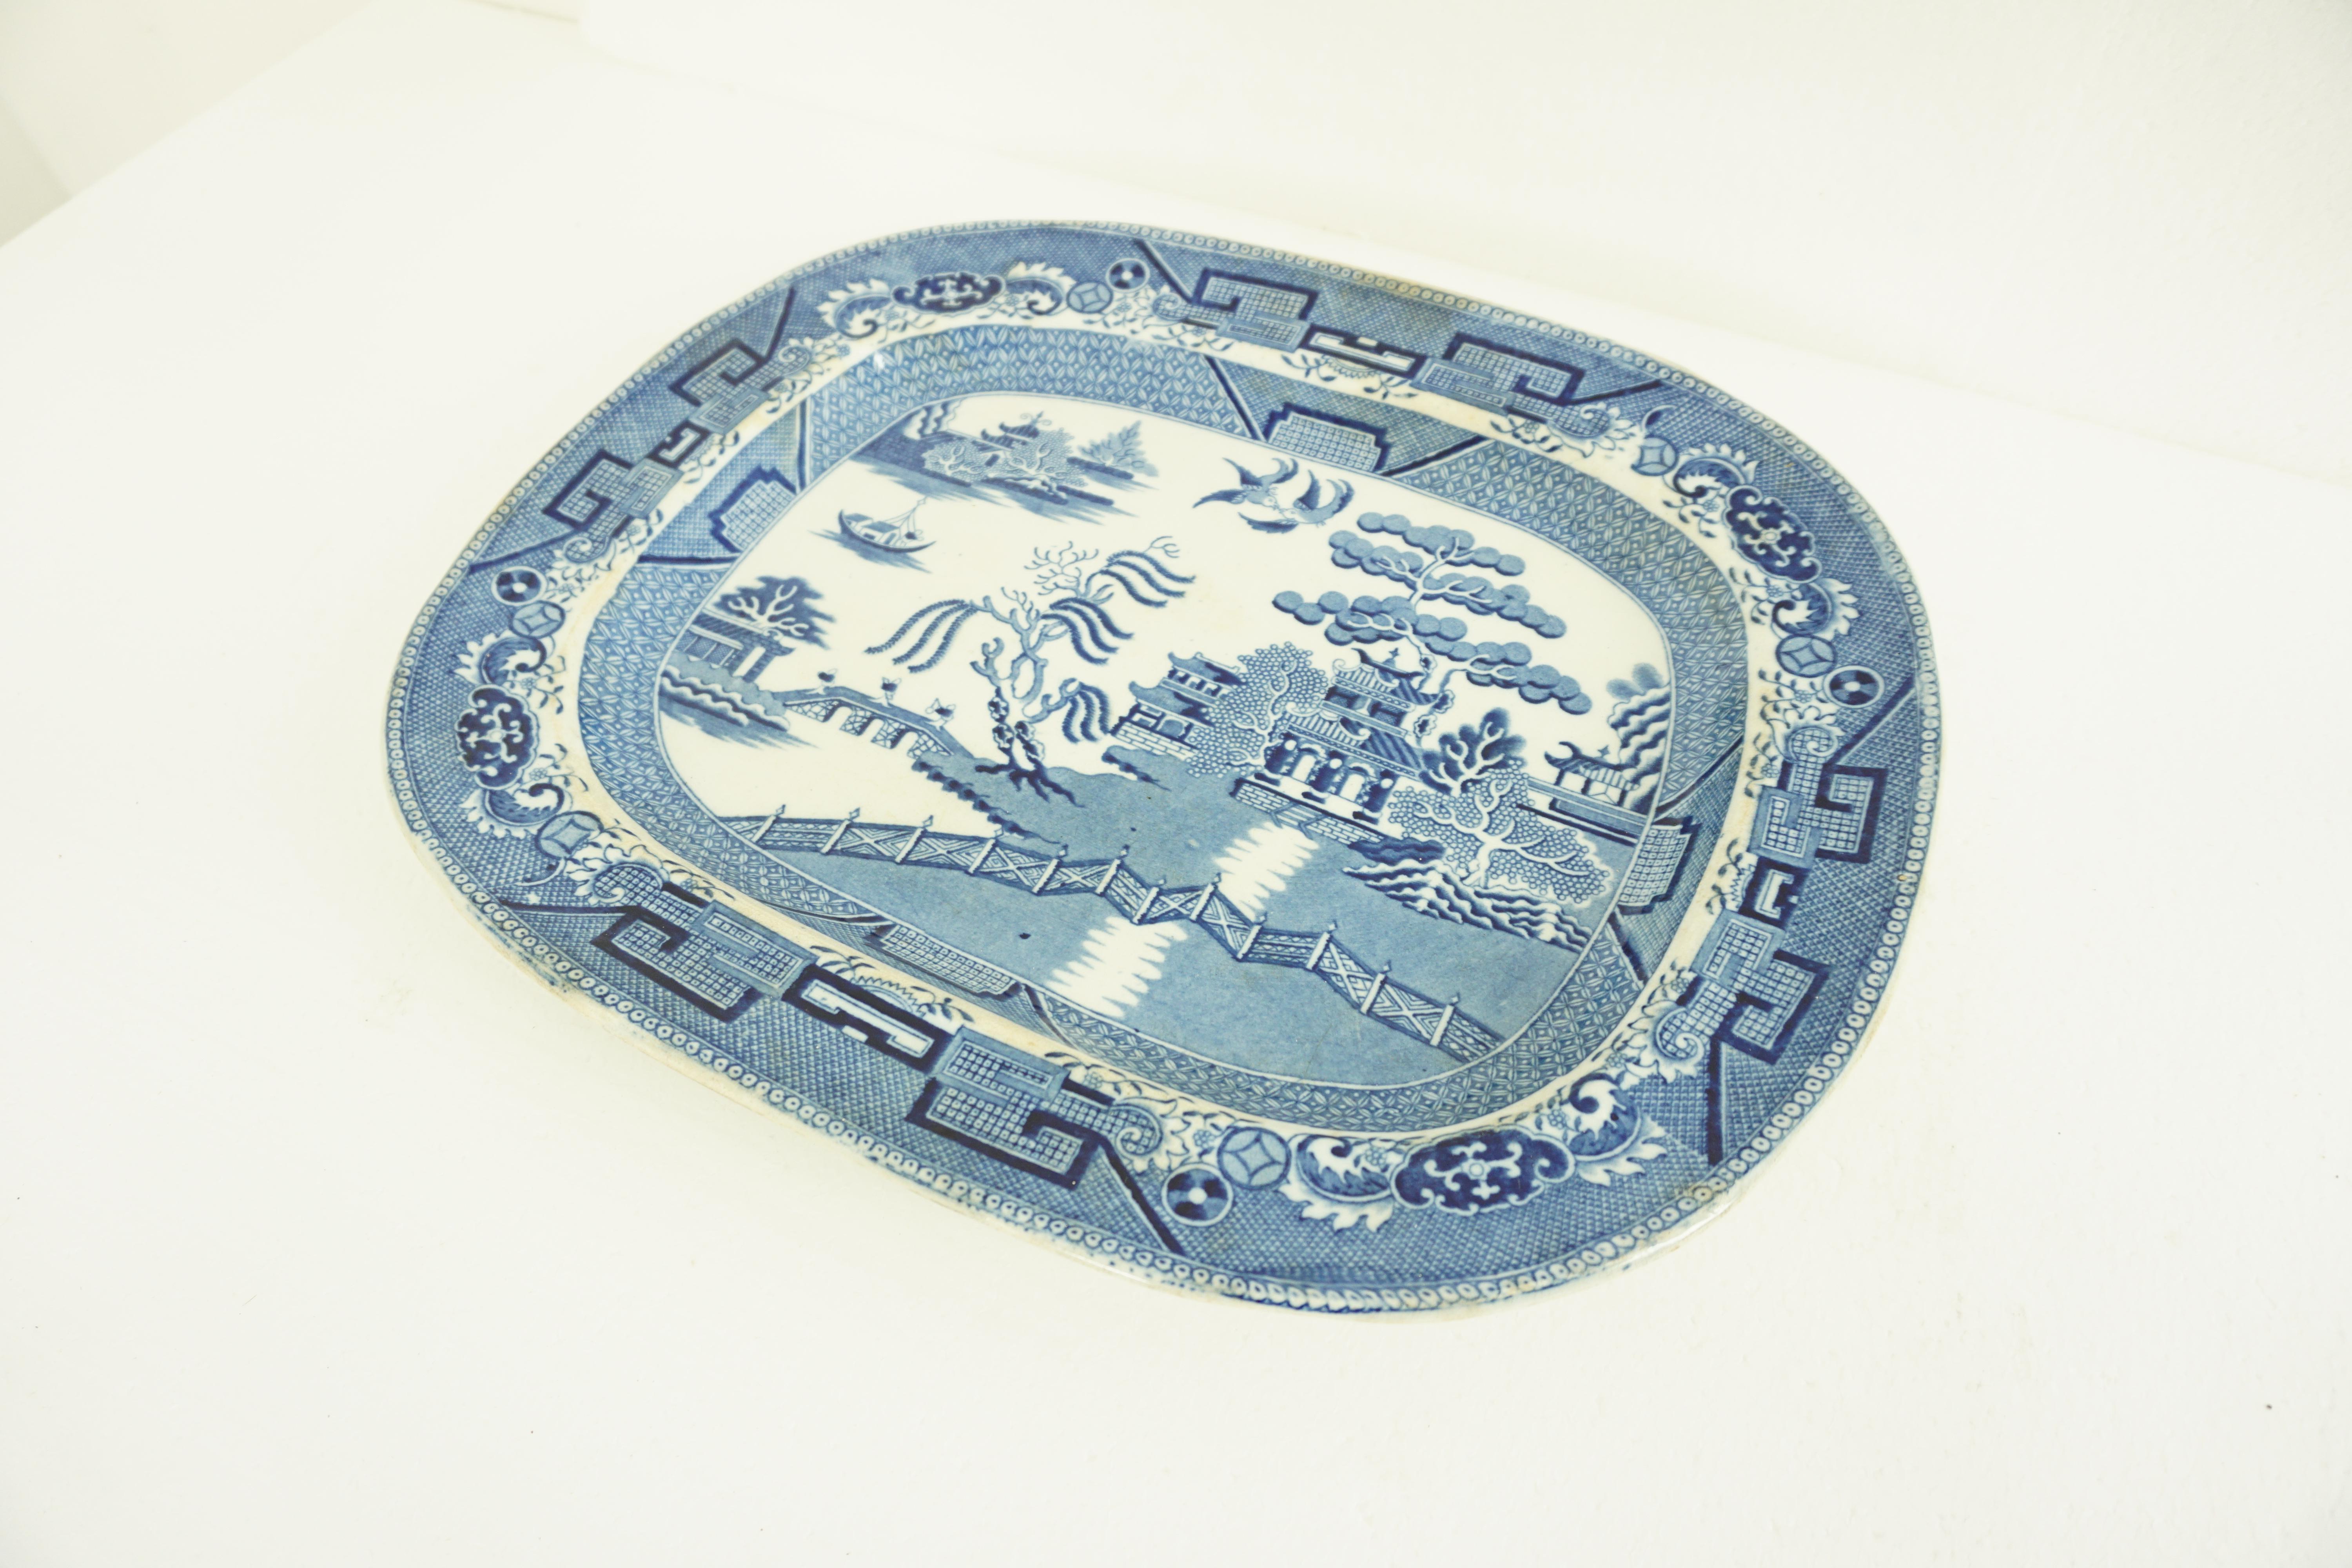 Antique blue willow platter transferware pottery, Scotland circa 1840, 1965

England

circa 1840
Willow pattern design
Large size
In good condition
No chips, cracks or restoration

$225

1965

Measures: 18